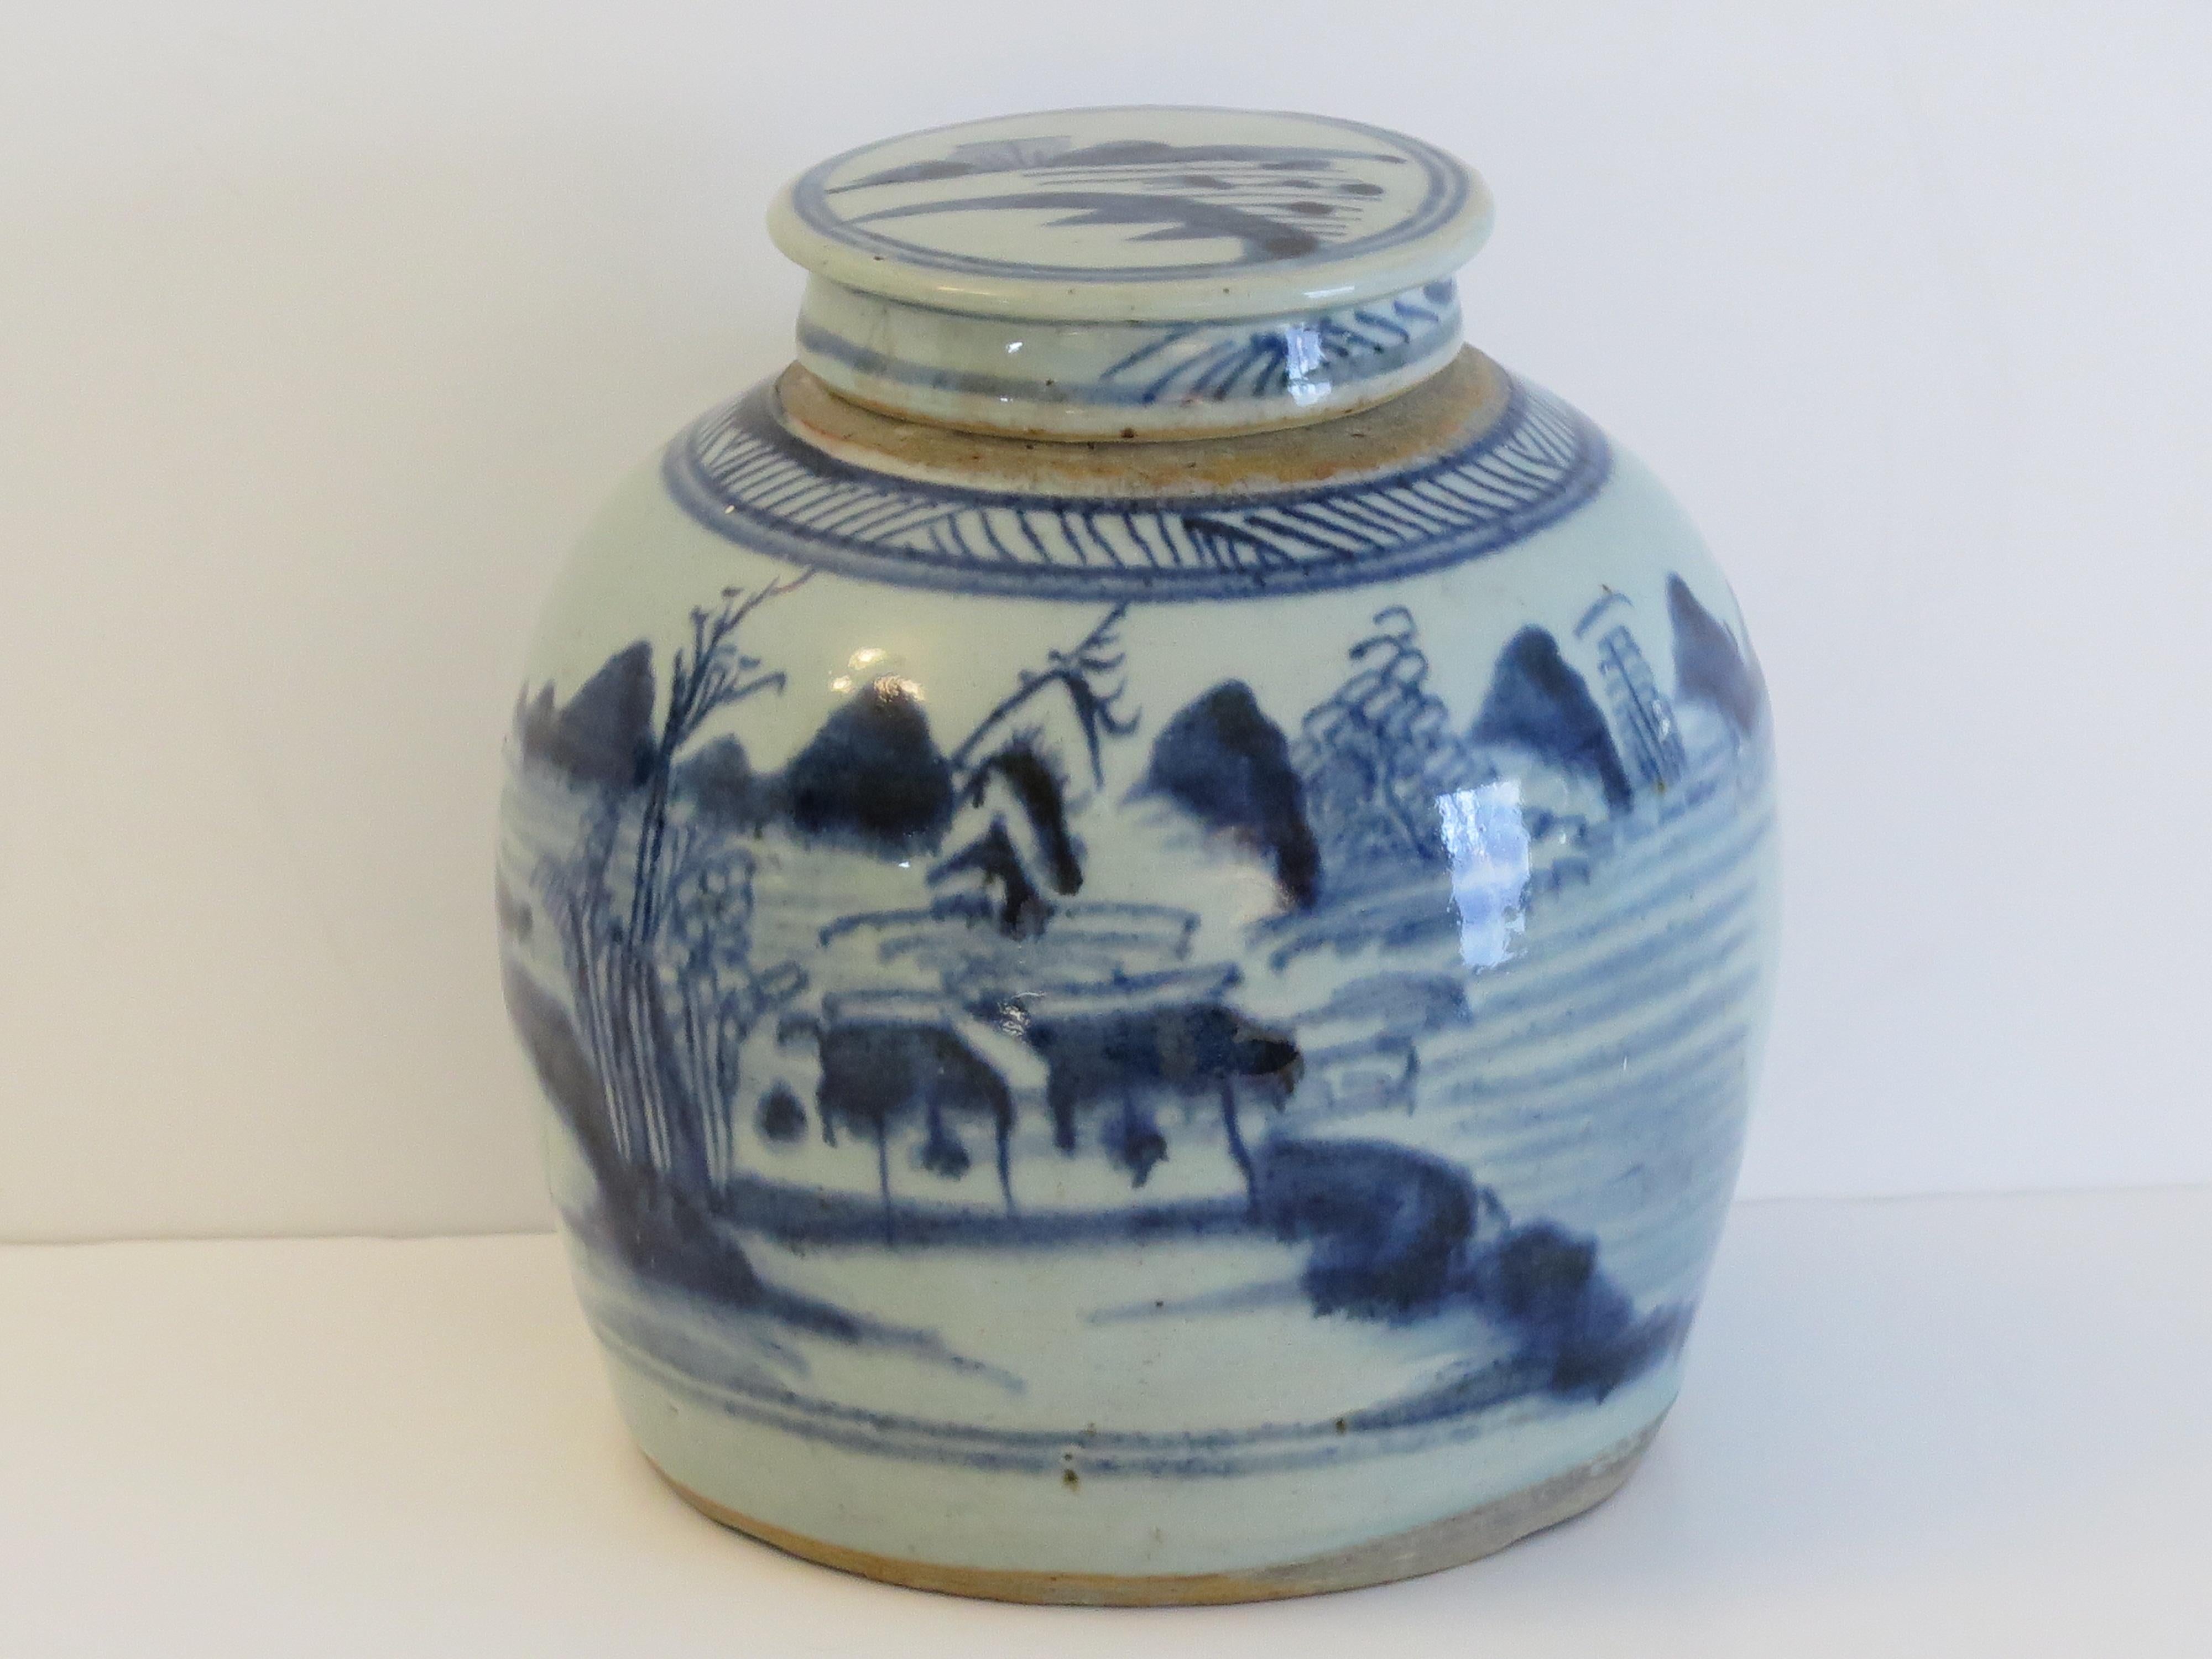 This is a heavy Chinese Export porcelain jar complete with lid, hand painted with a blue and white lakeside scene and dating to the late 18th century, Qing dynasty.

This is a well potted piece with a very decorative bulbous shape and a glassy glaze